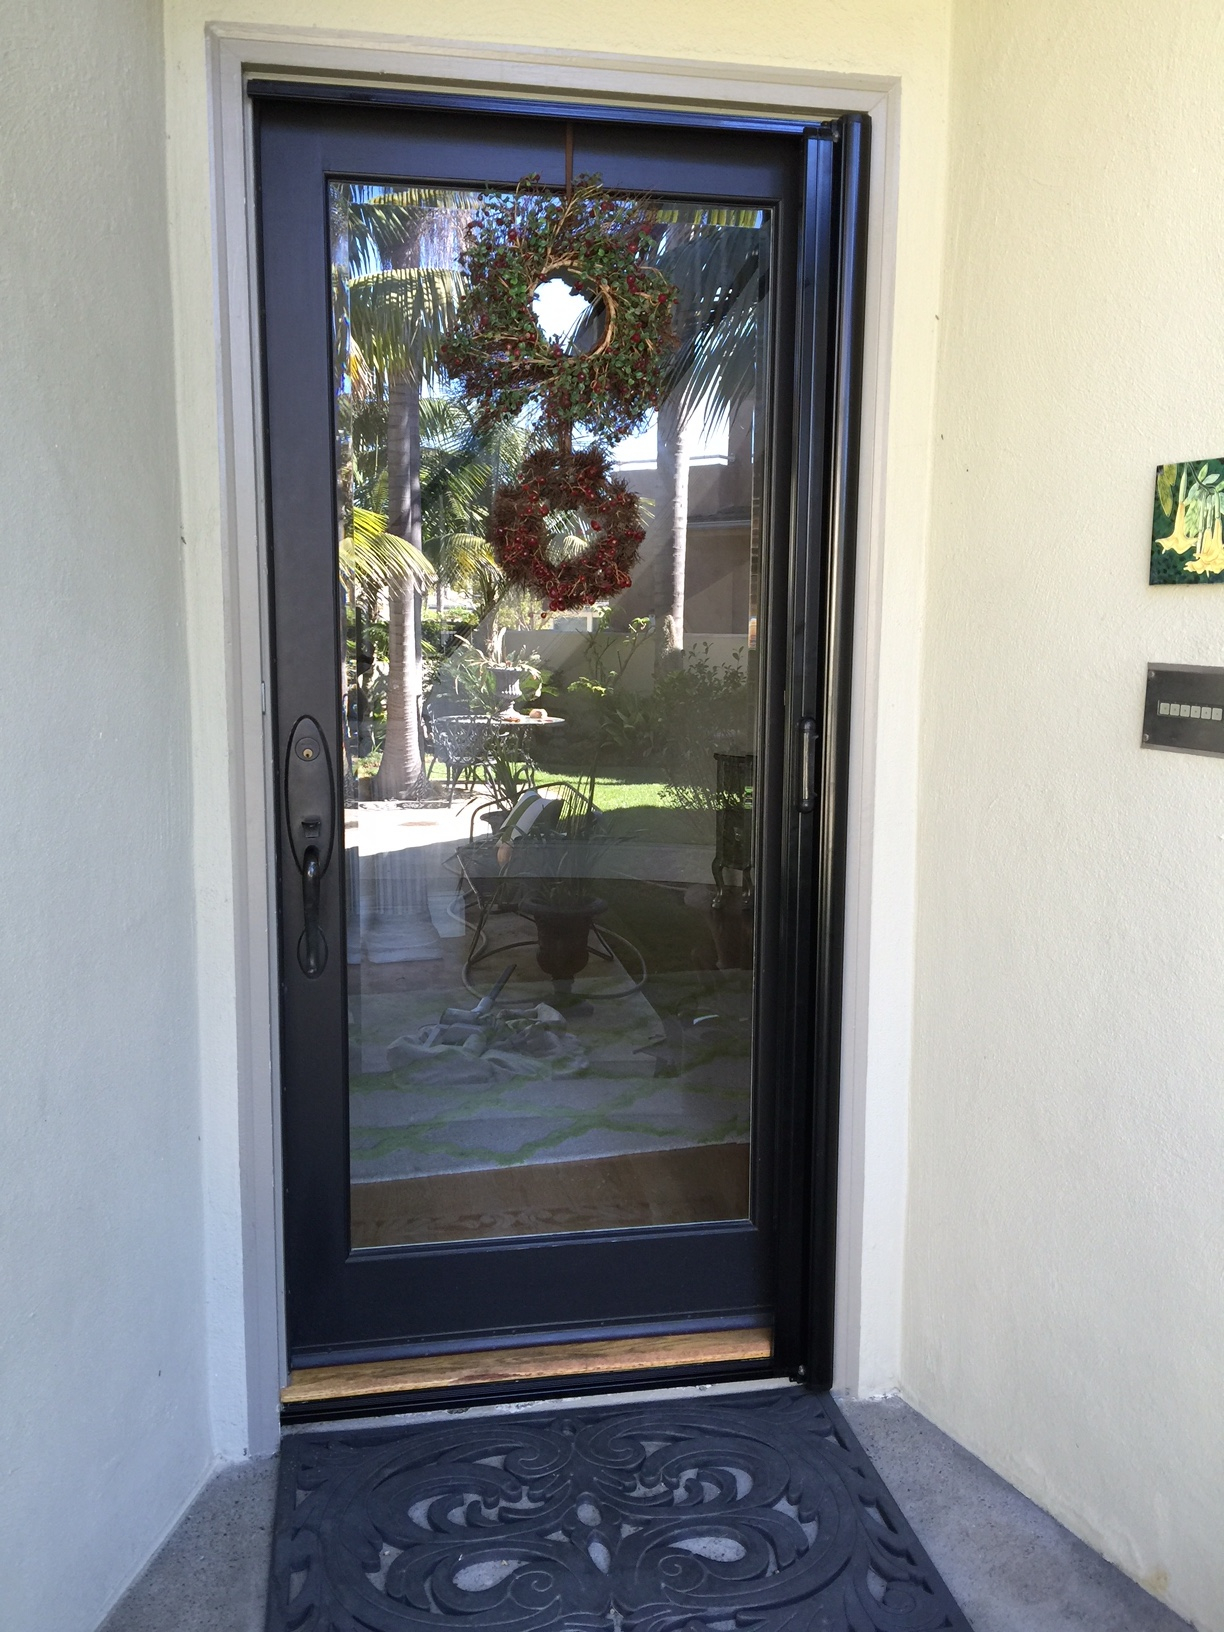 Clear View Retractable Screen Door Pictures And Recent Installations within proportions 1224 X 1632